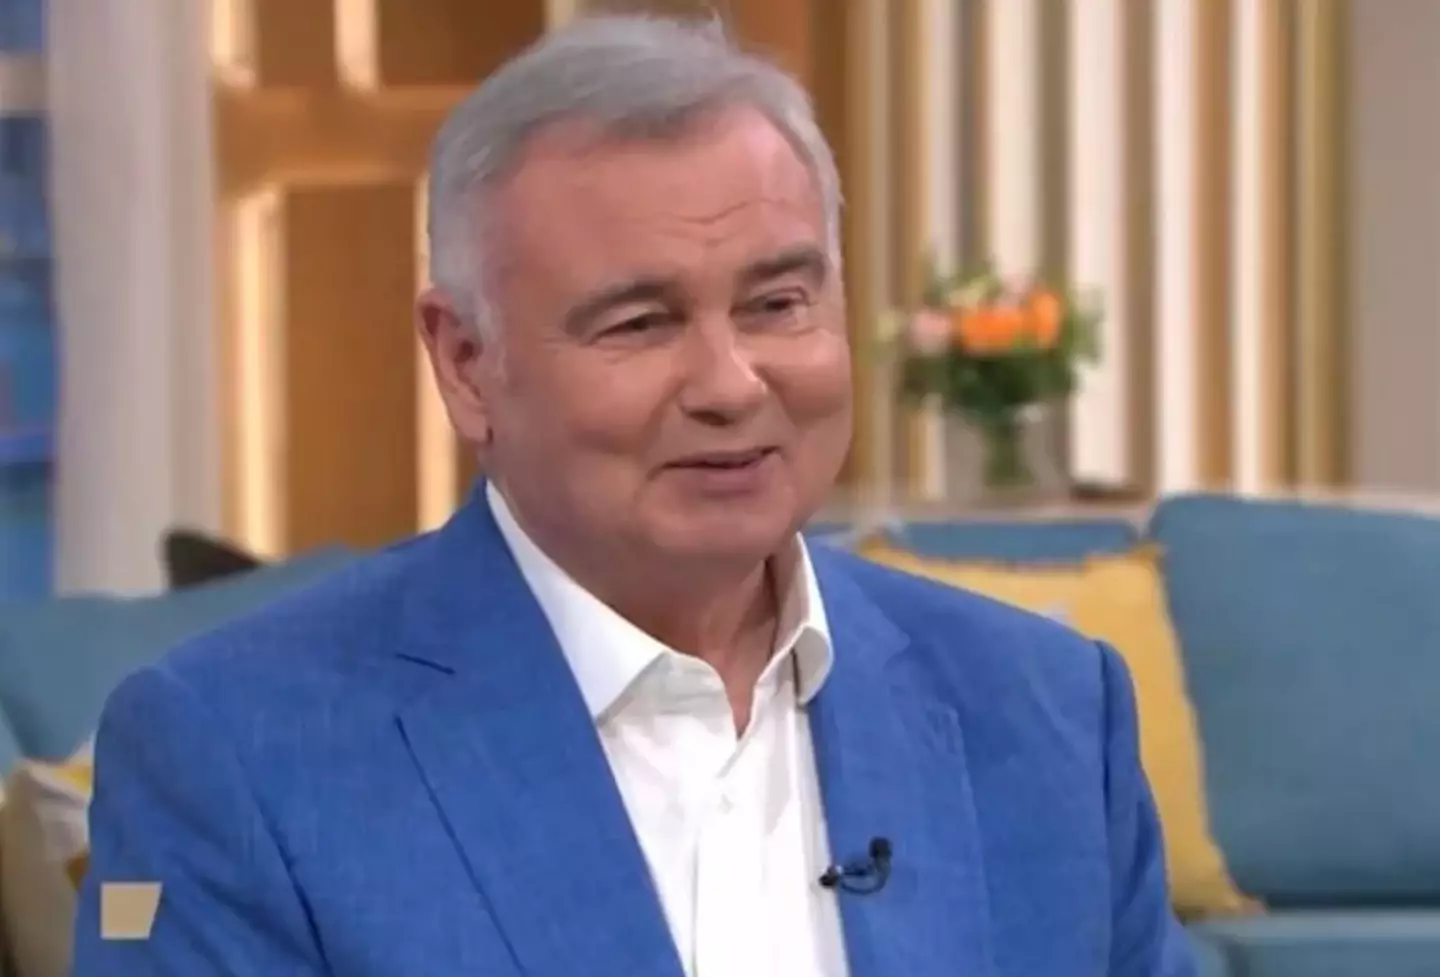 Eamonn Holmes took a swipe at his former colleagues.